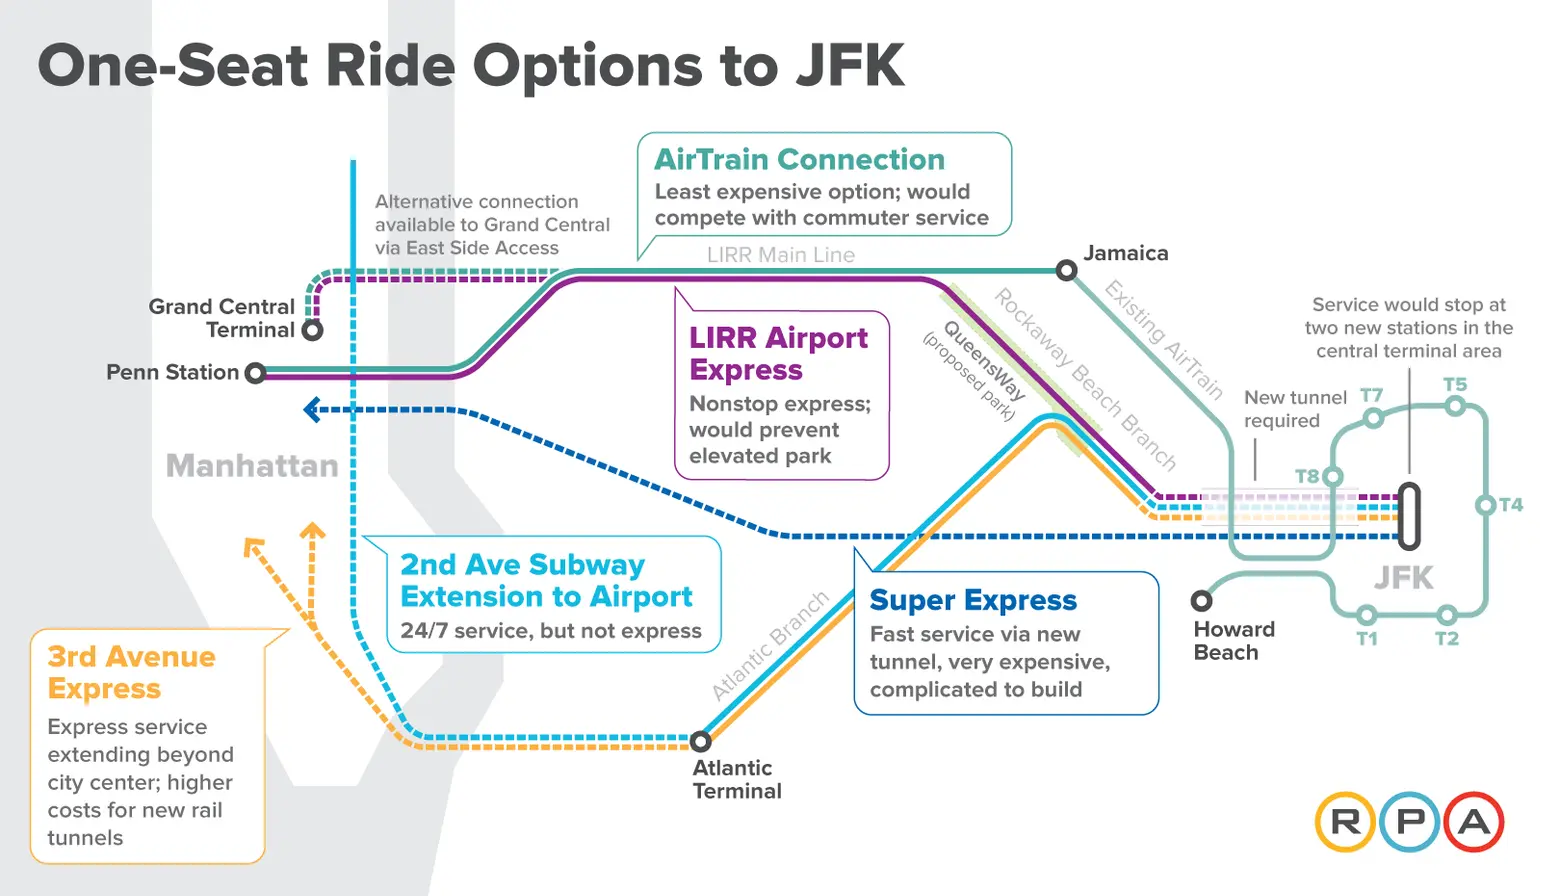 rpa-one-seat-ride-options-to-jfk